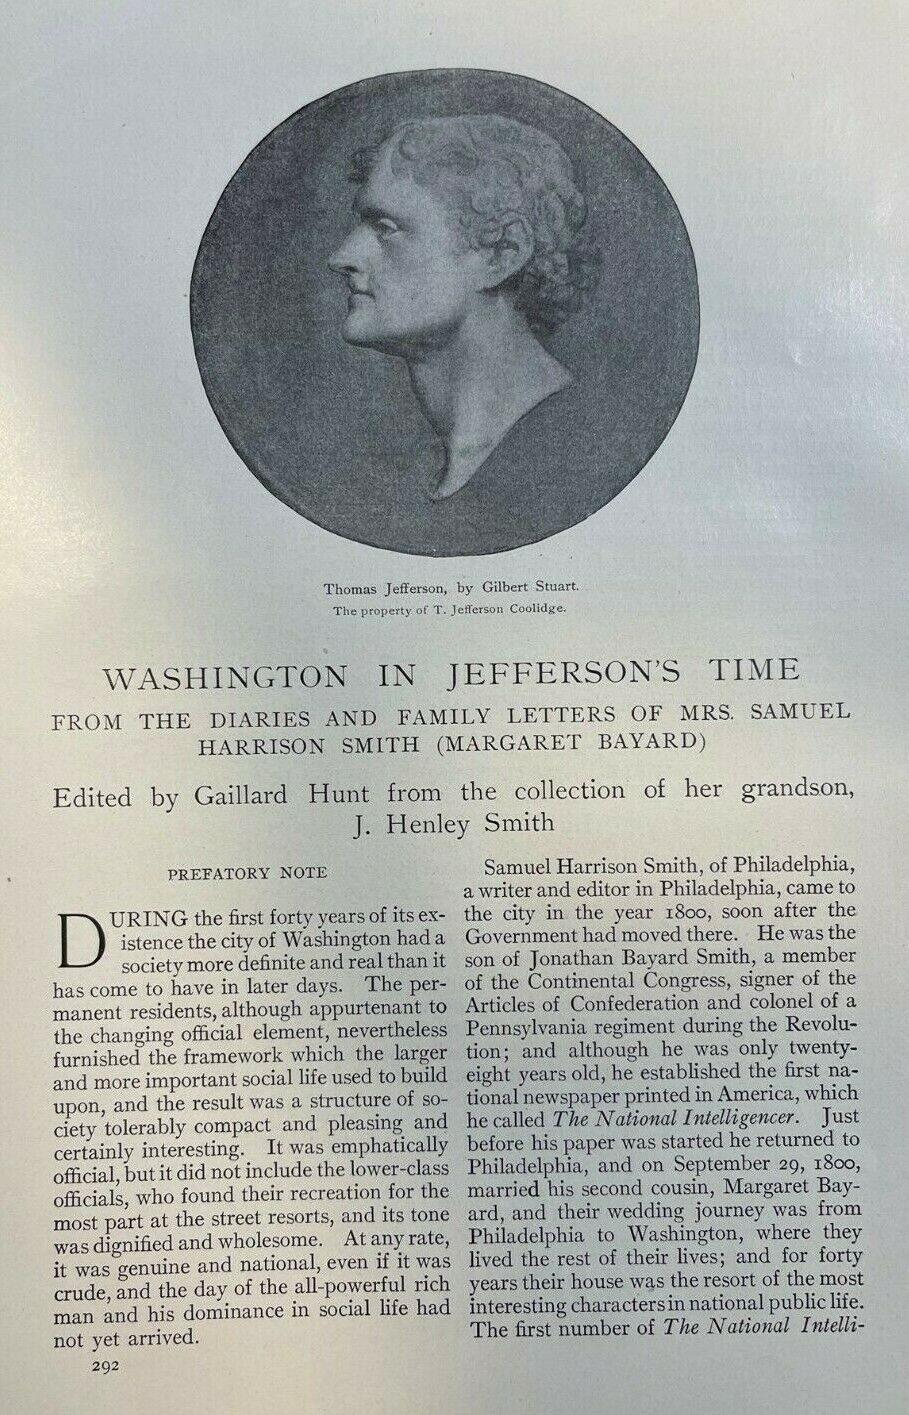 1906 Washington D C in the Time of Thomas Jefferson illustrated